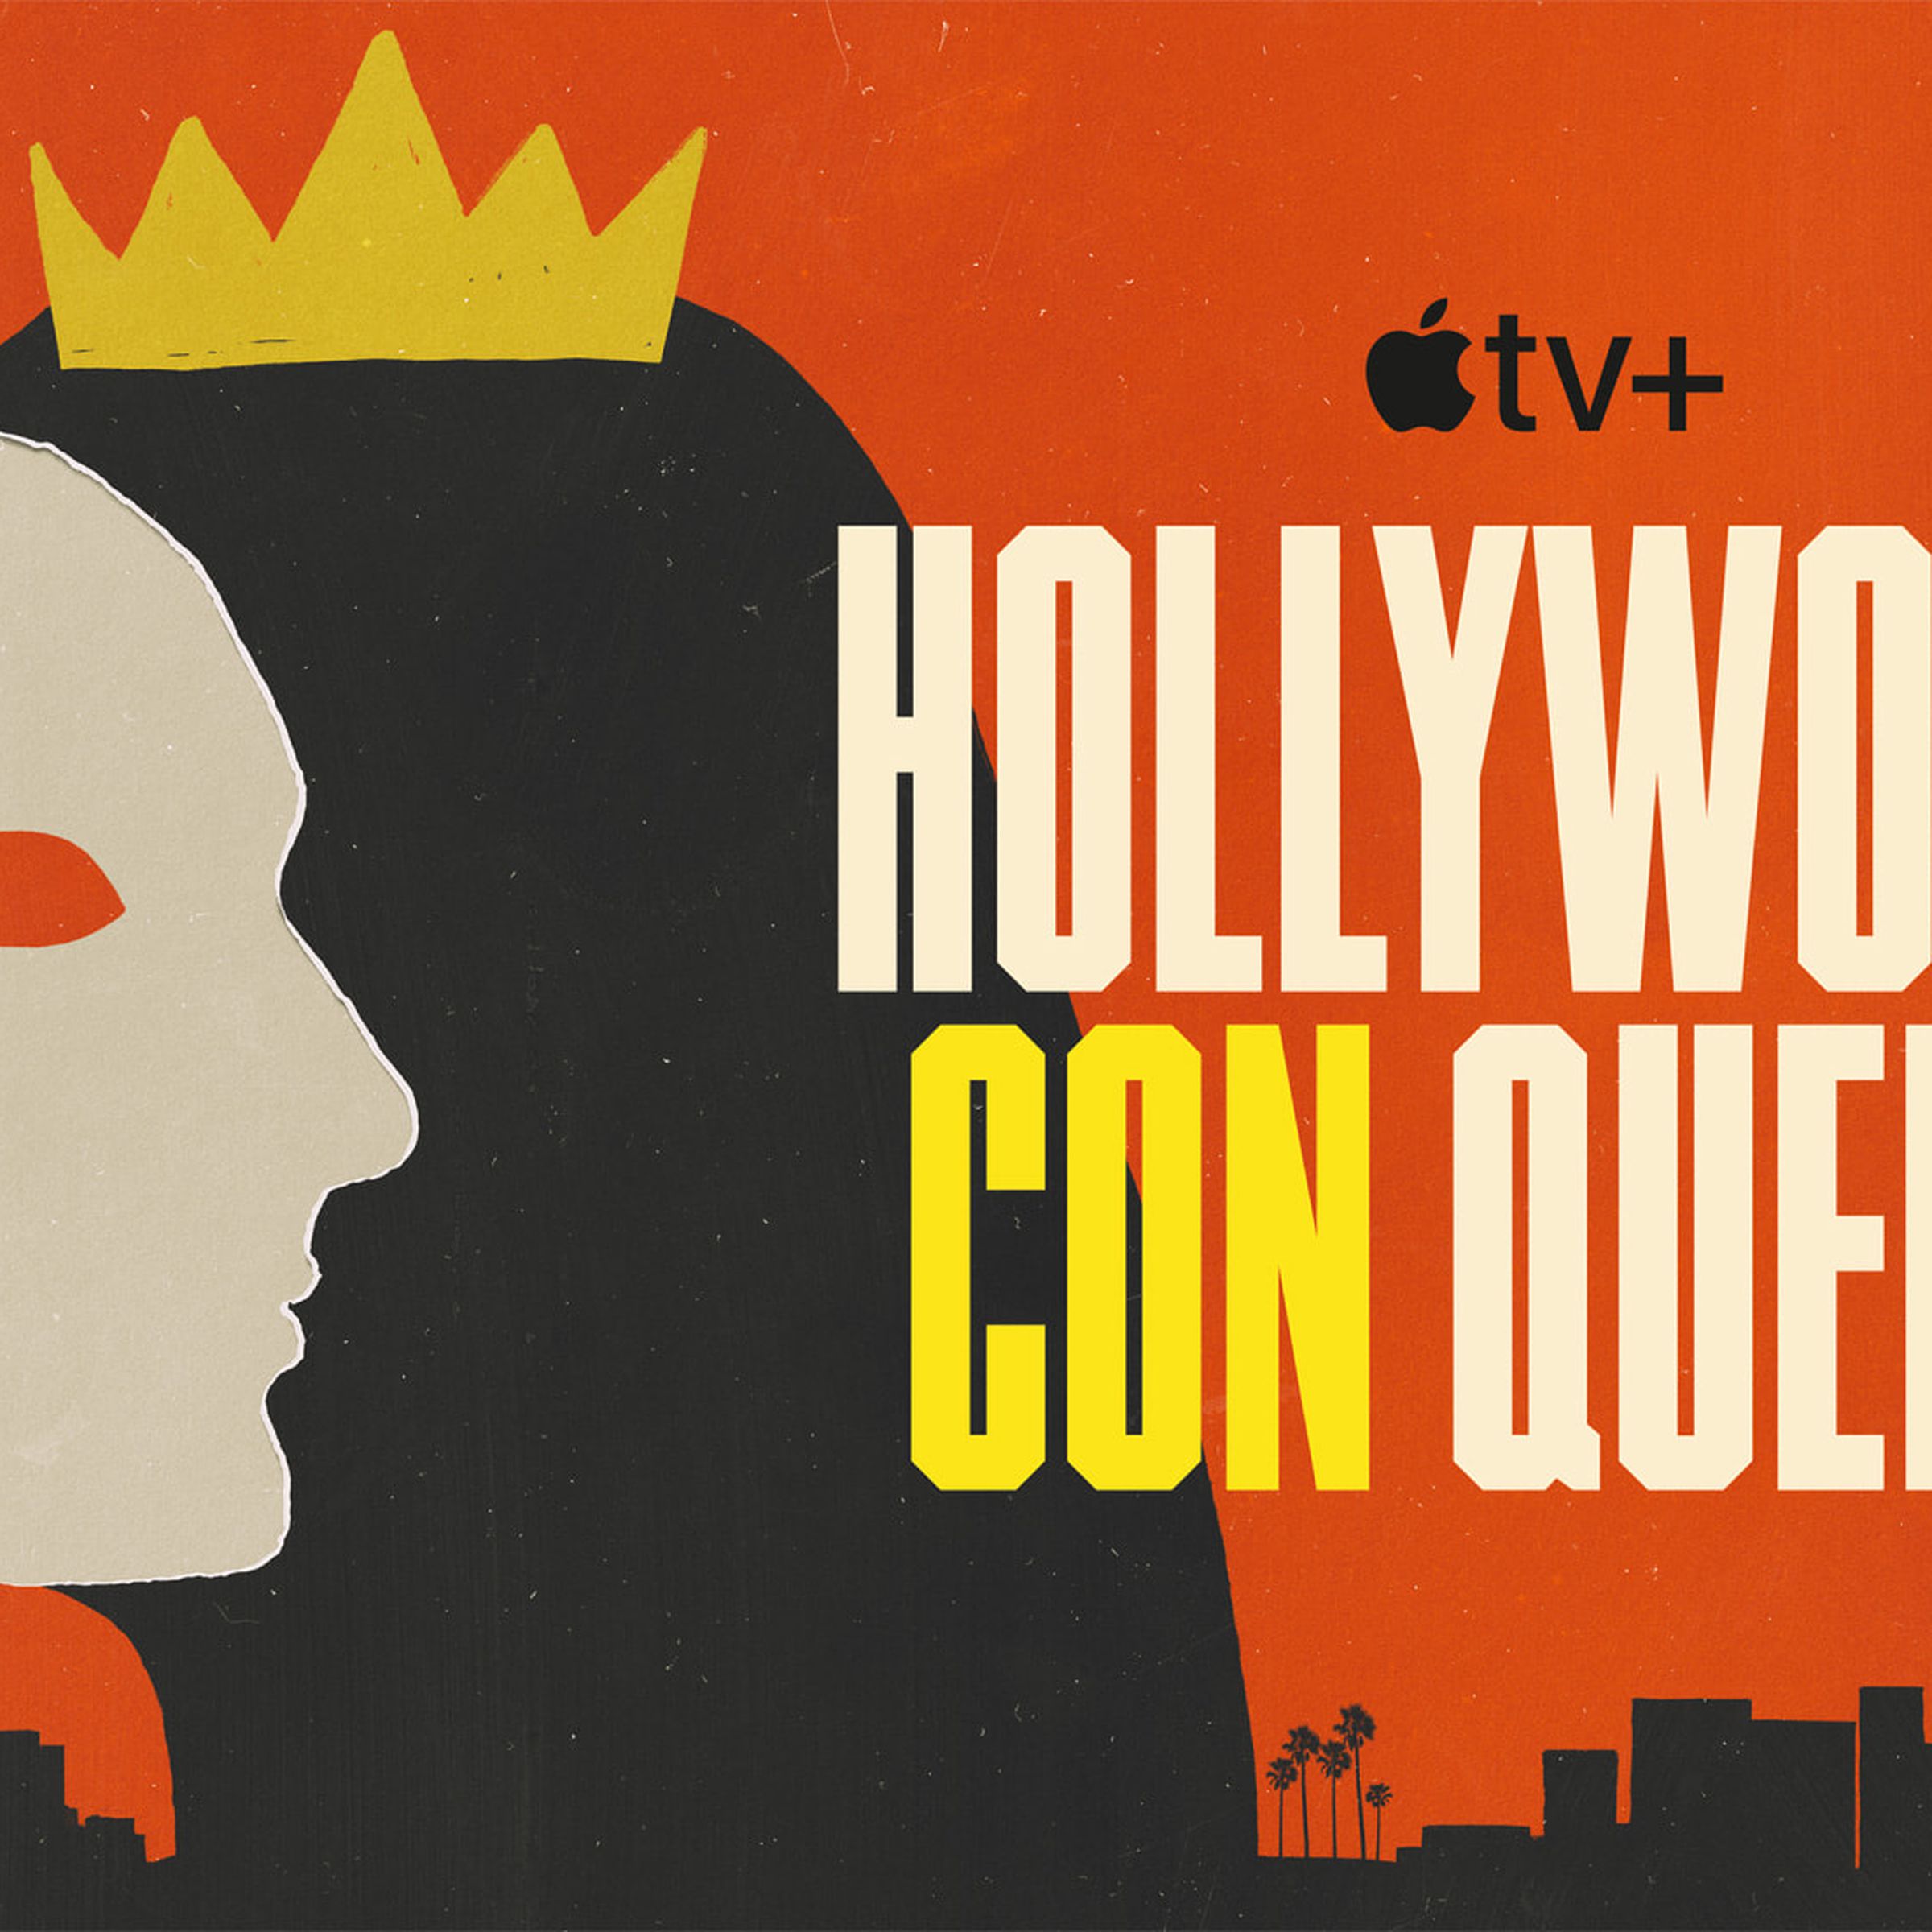 Promotional image of Hollywood Con Queen, showing a two-faced illustration